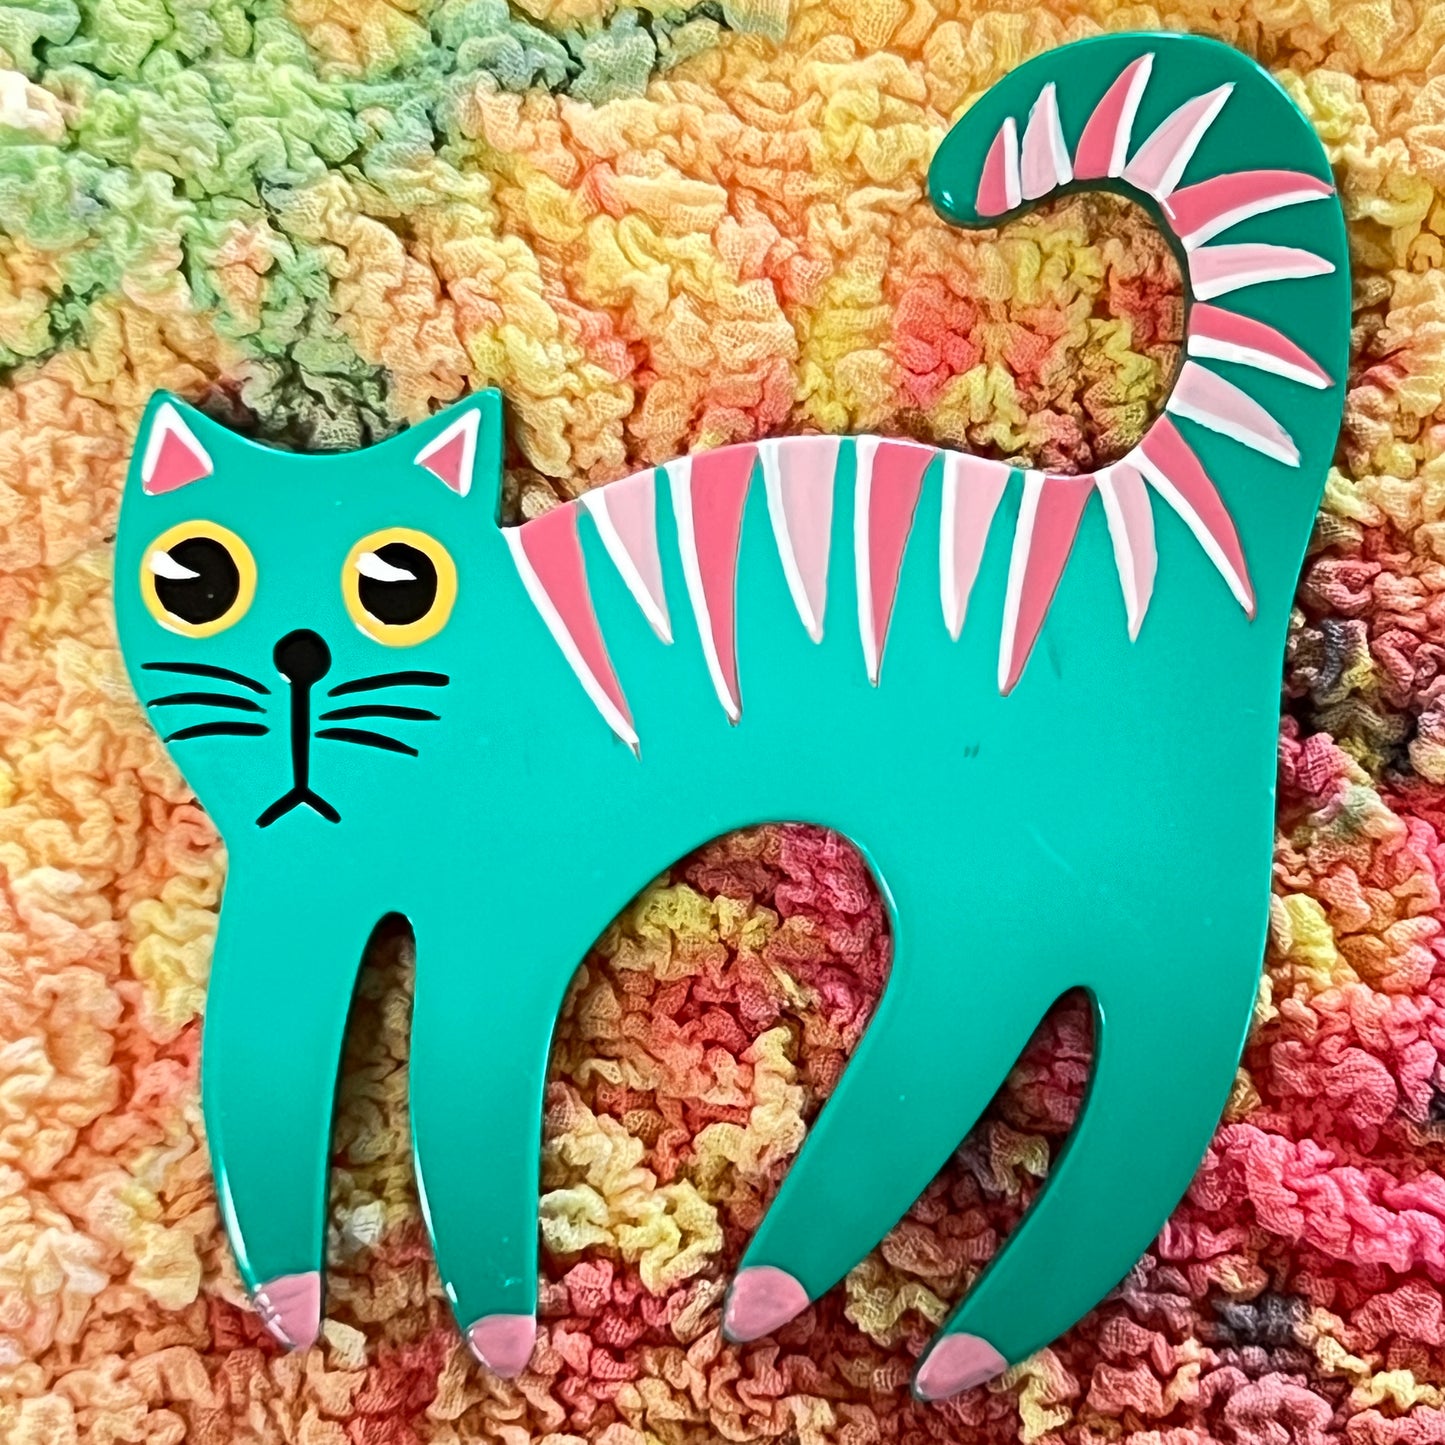 The Wilson Cat Brooch in its Lagoon Green Version